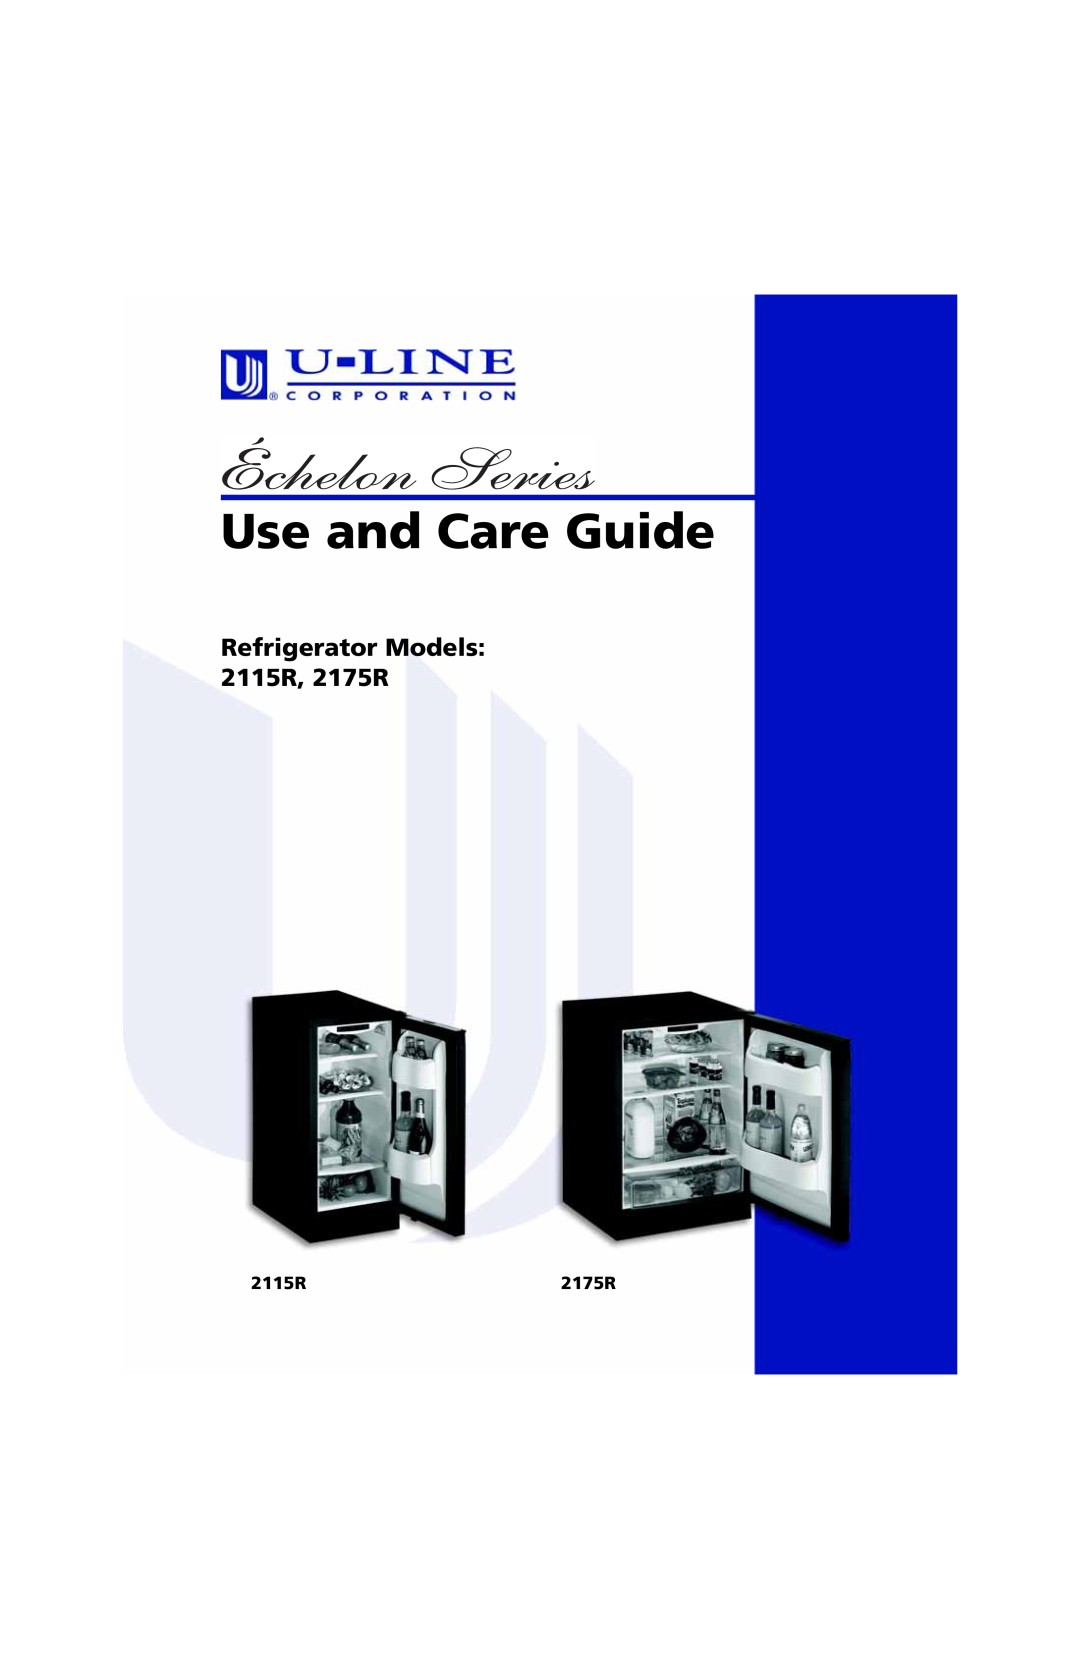 U-Line manual Use and Care Guide, Refrigerator Models 2115R, 2175R 